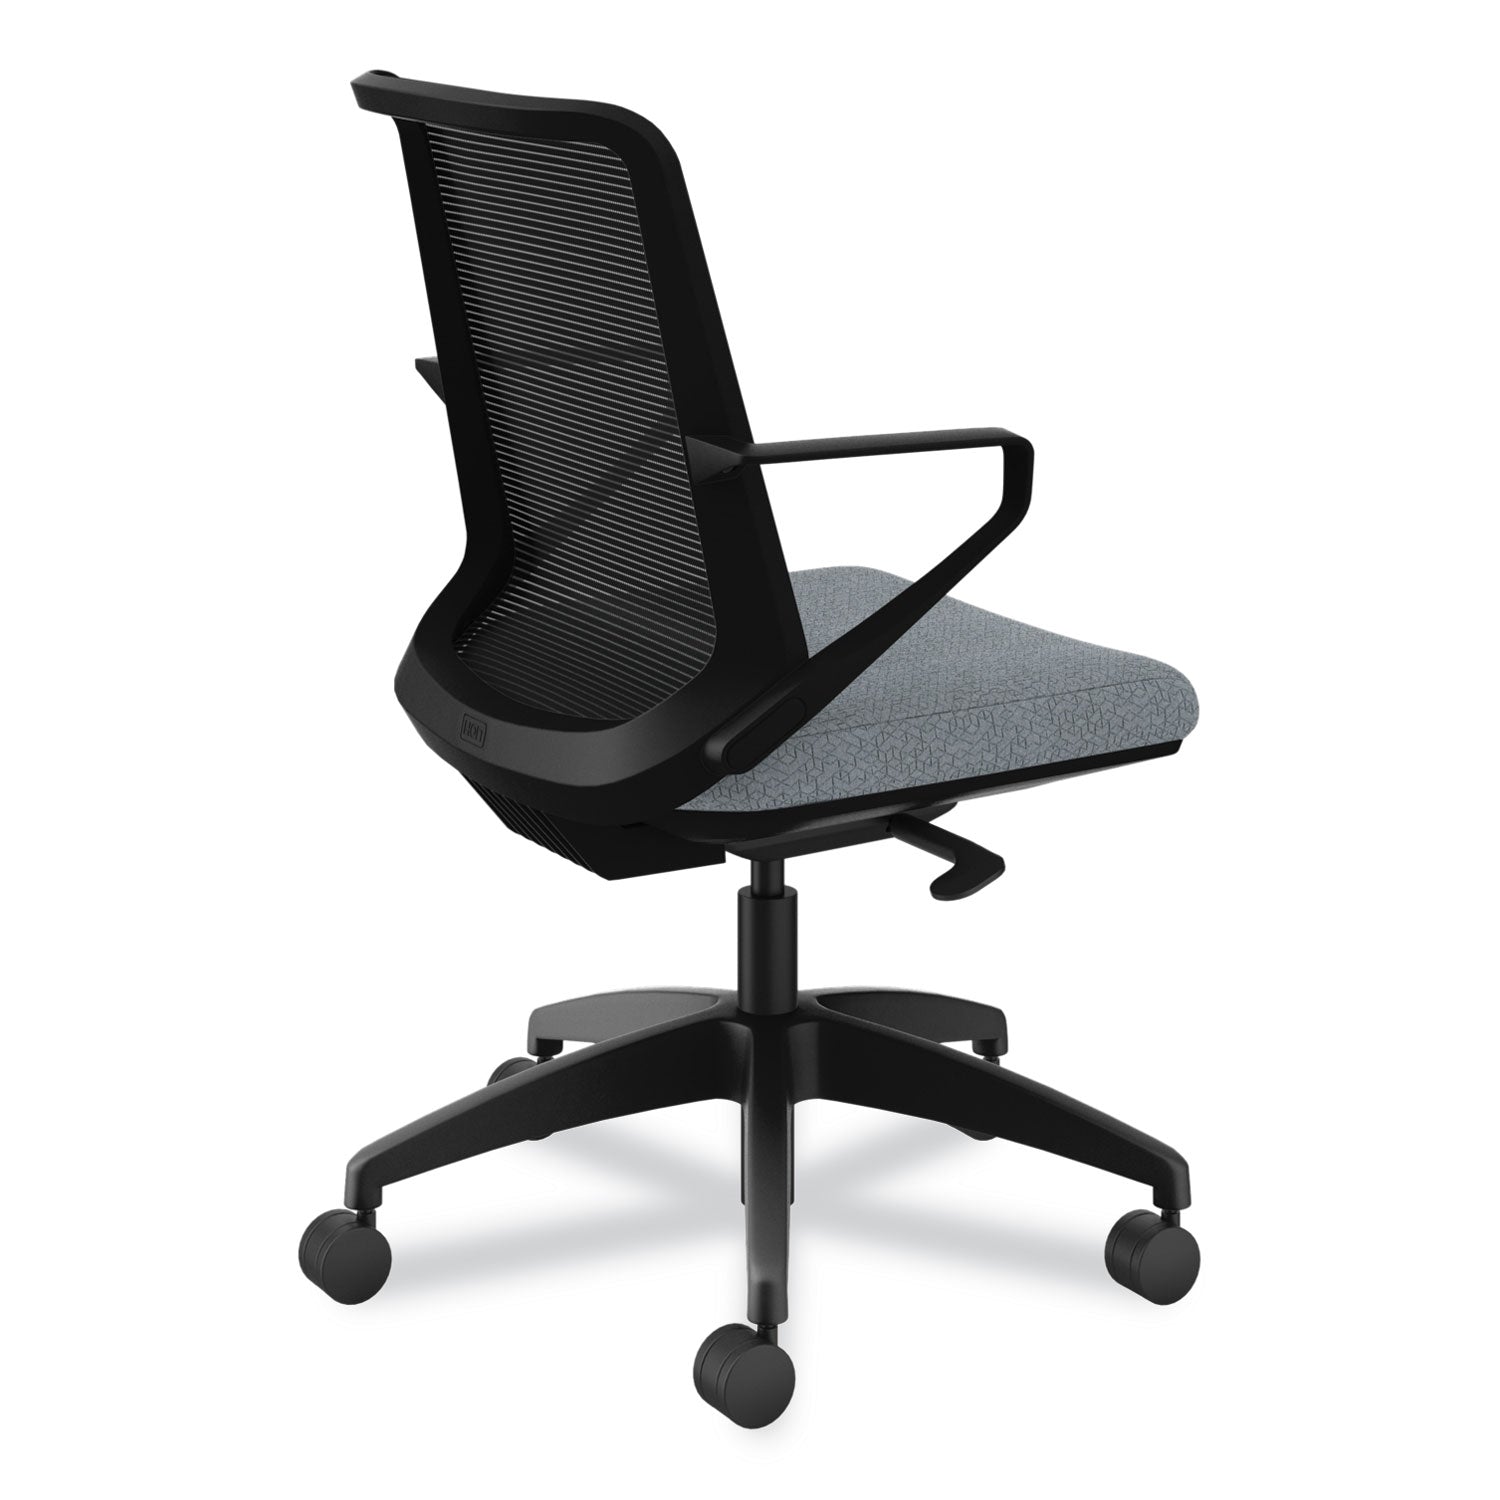 cliq-office-chair-supports-up-to-300-lb-17-to-22-seat-height-basalt-seat-black-back-base-ships-in-7-10-business-days_honclqimapx25t - 7